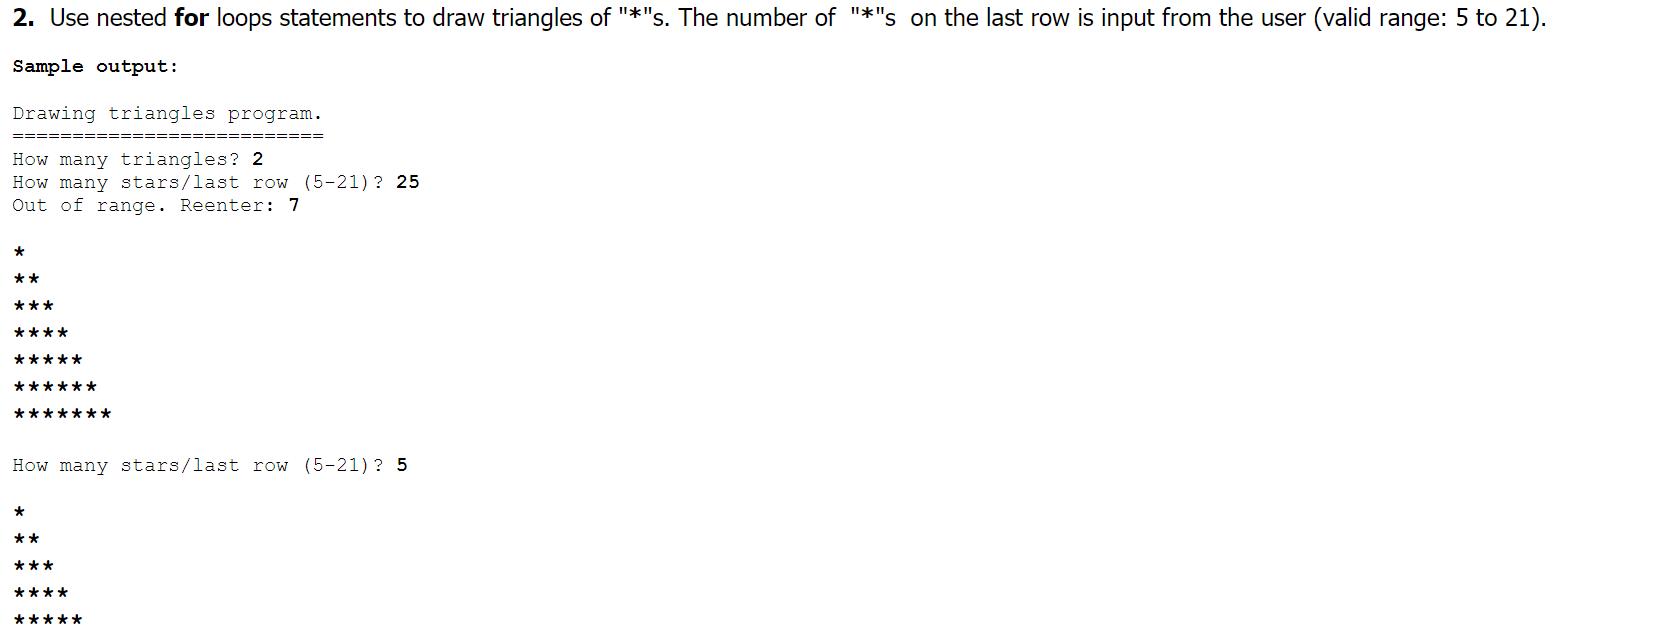 2. Use nested for loops statements to draw triangles of *s. The number of *s on the last row is input from the user (vali